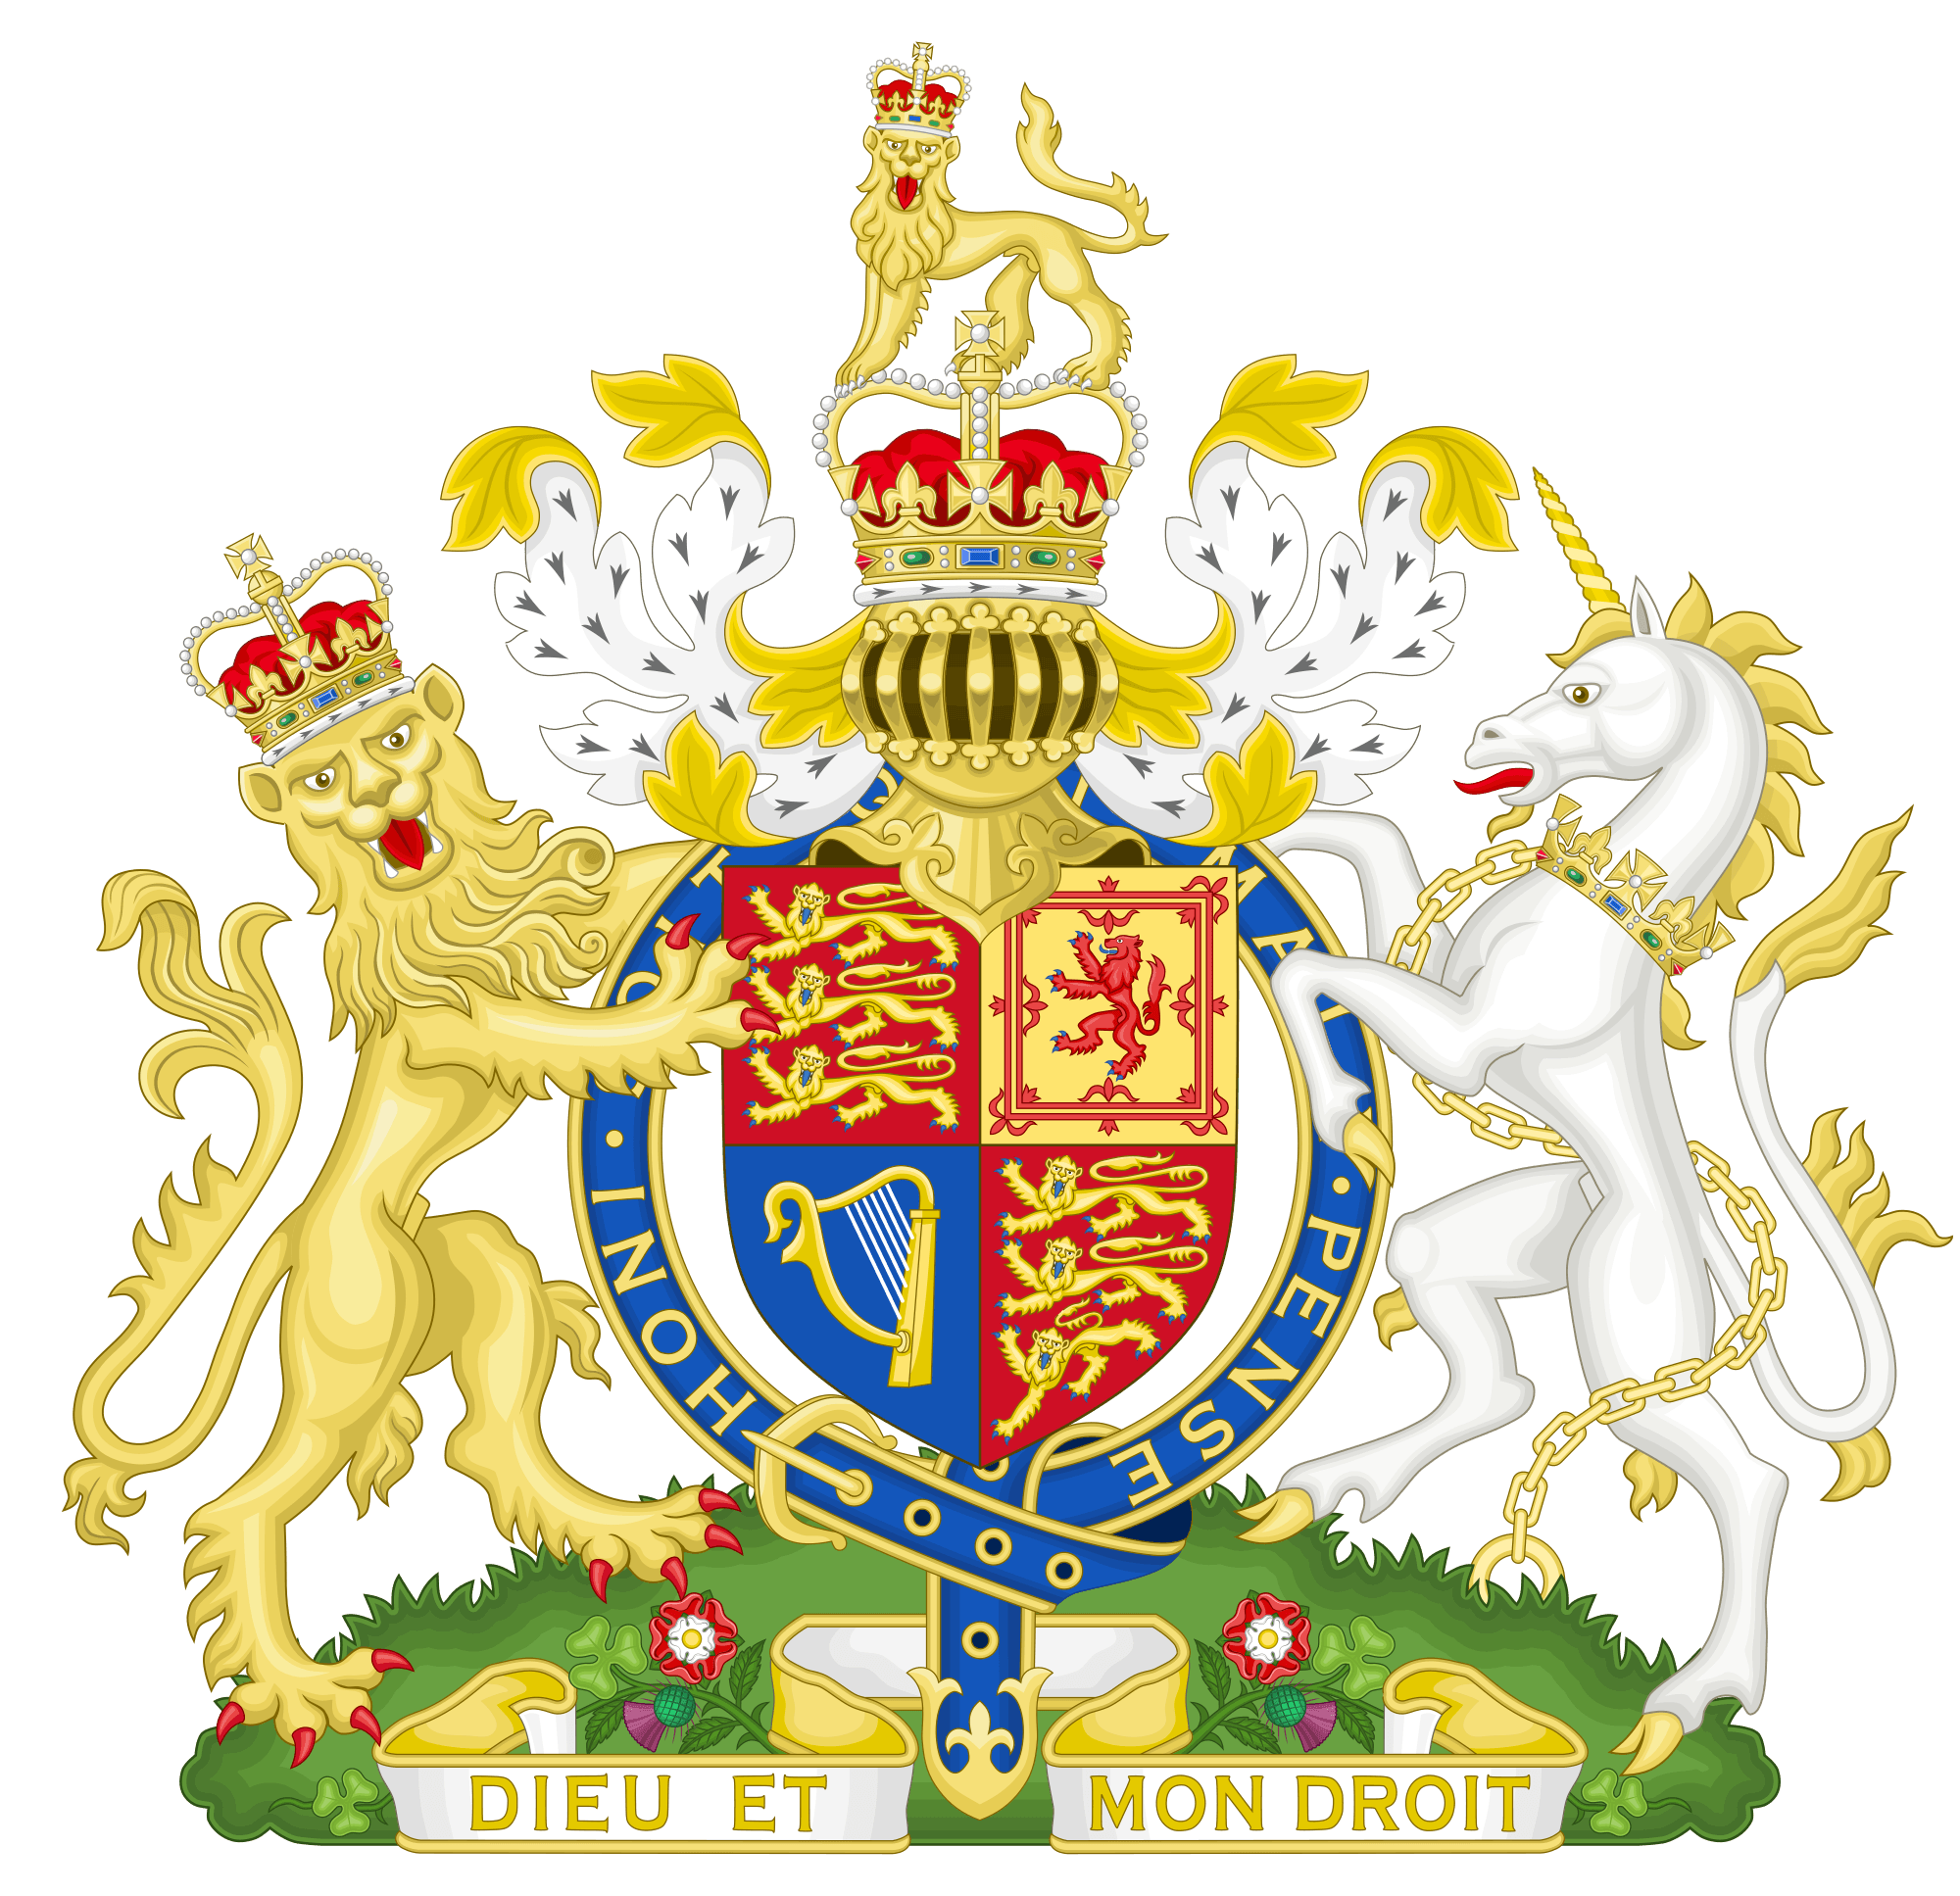 Kingdom of Lions Logo - Royal coat of arms of the United Kingdom